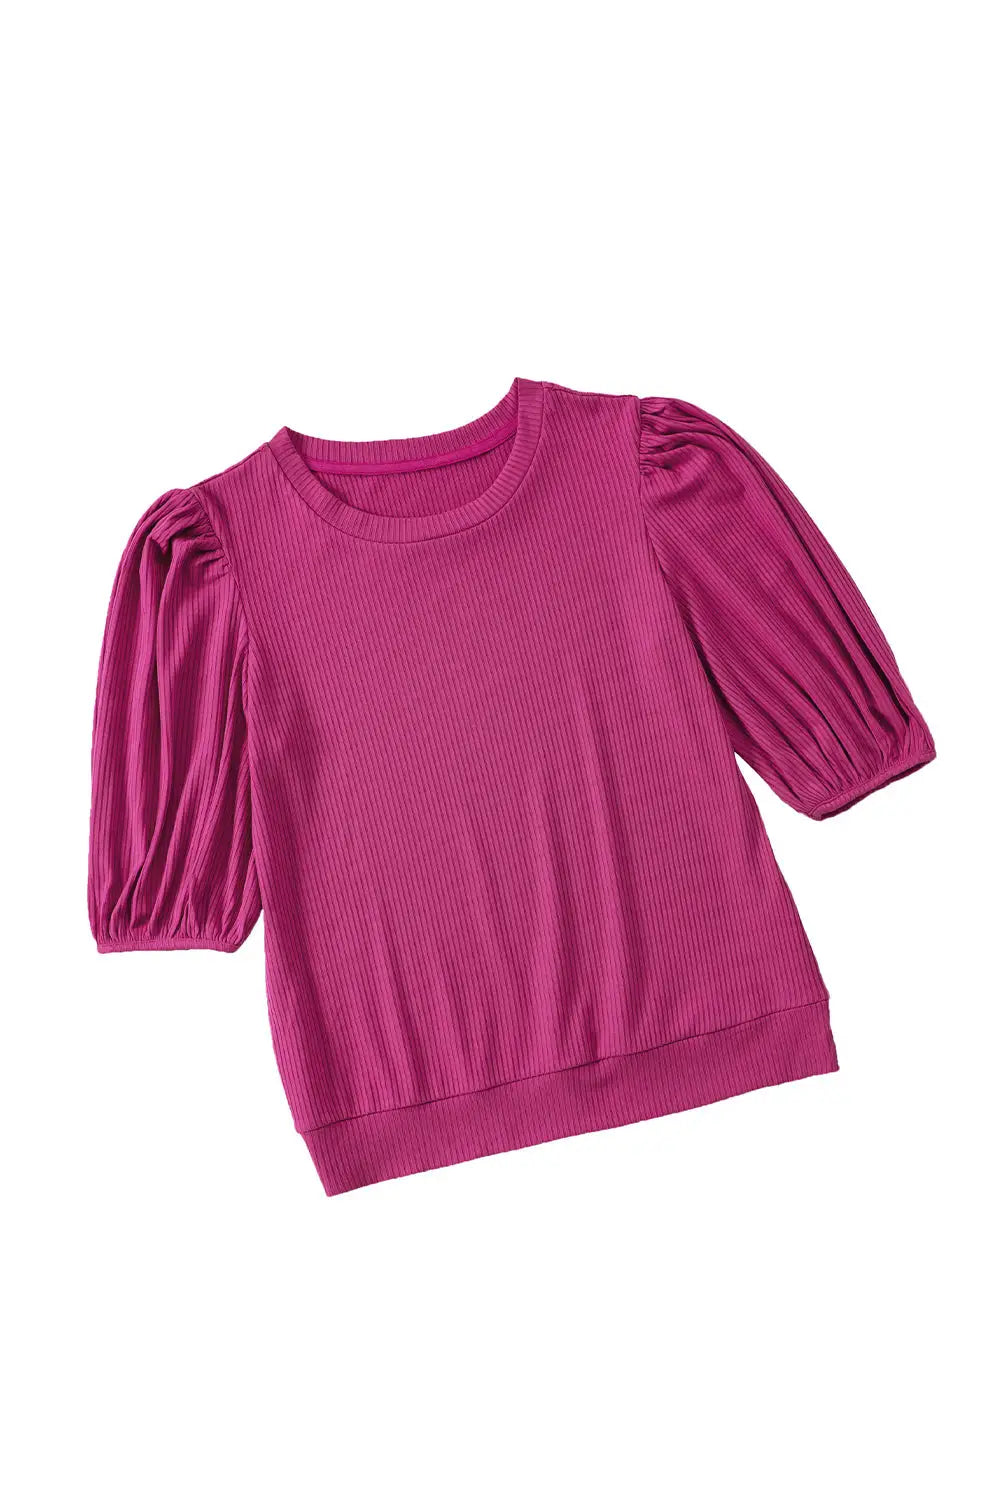 Rose Bubble Half Sleeves Ribbed Knit Top-12